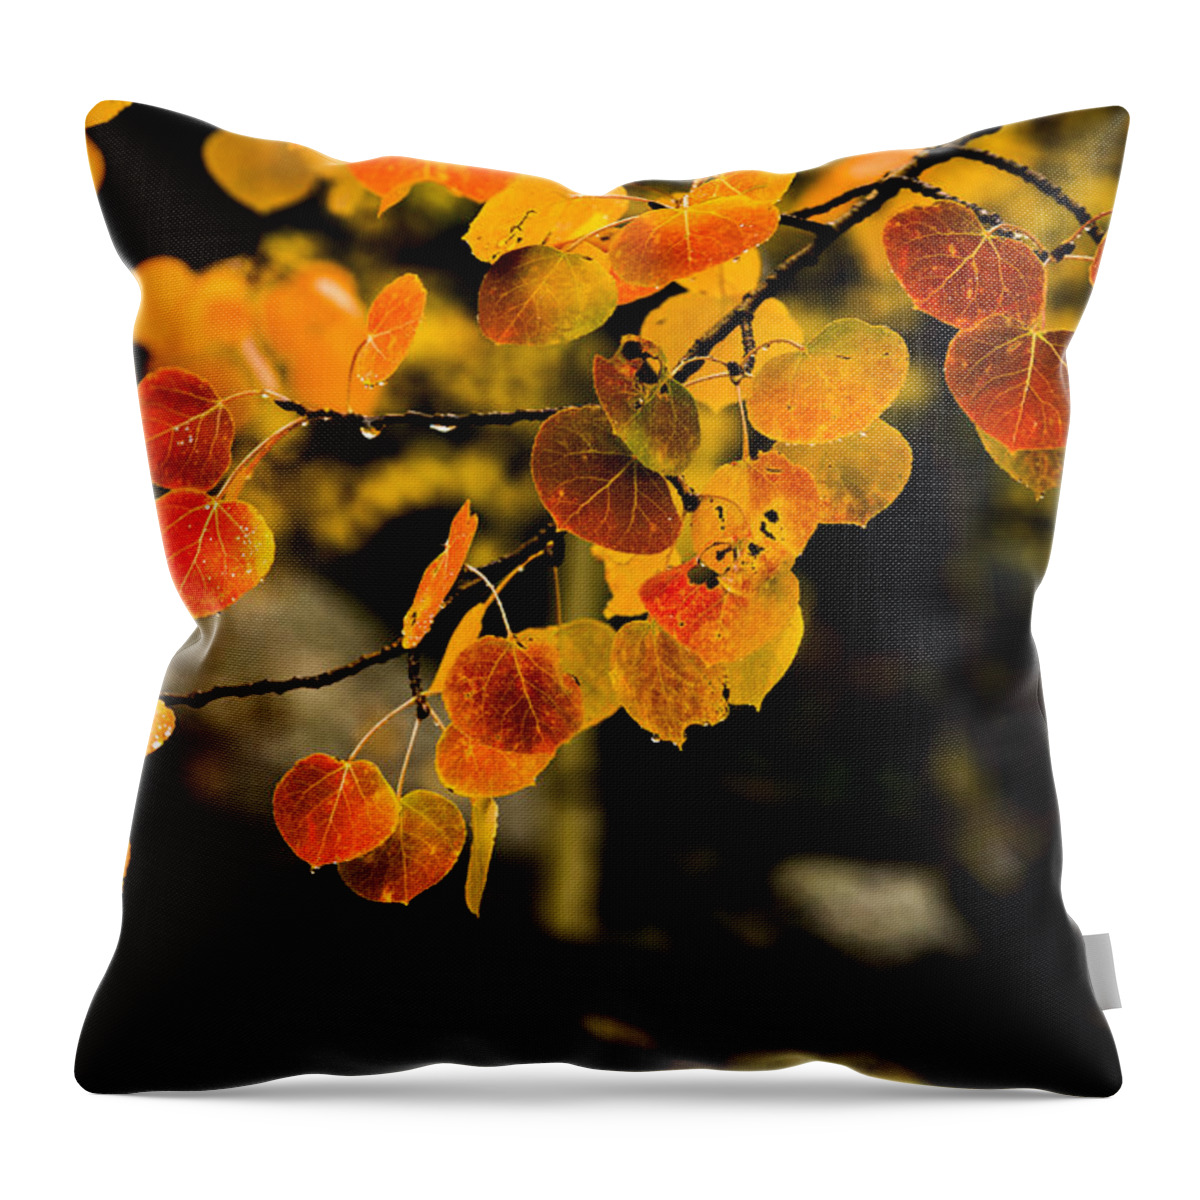 Fall Throw Pillow featuring the photograph After Rain by Chad Dutson